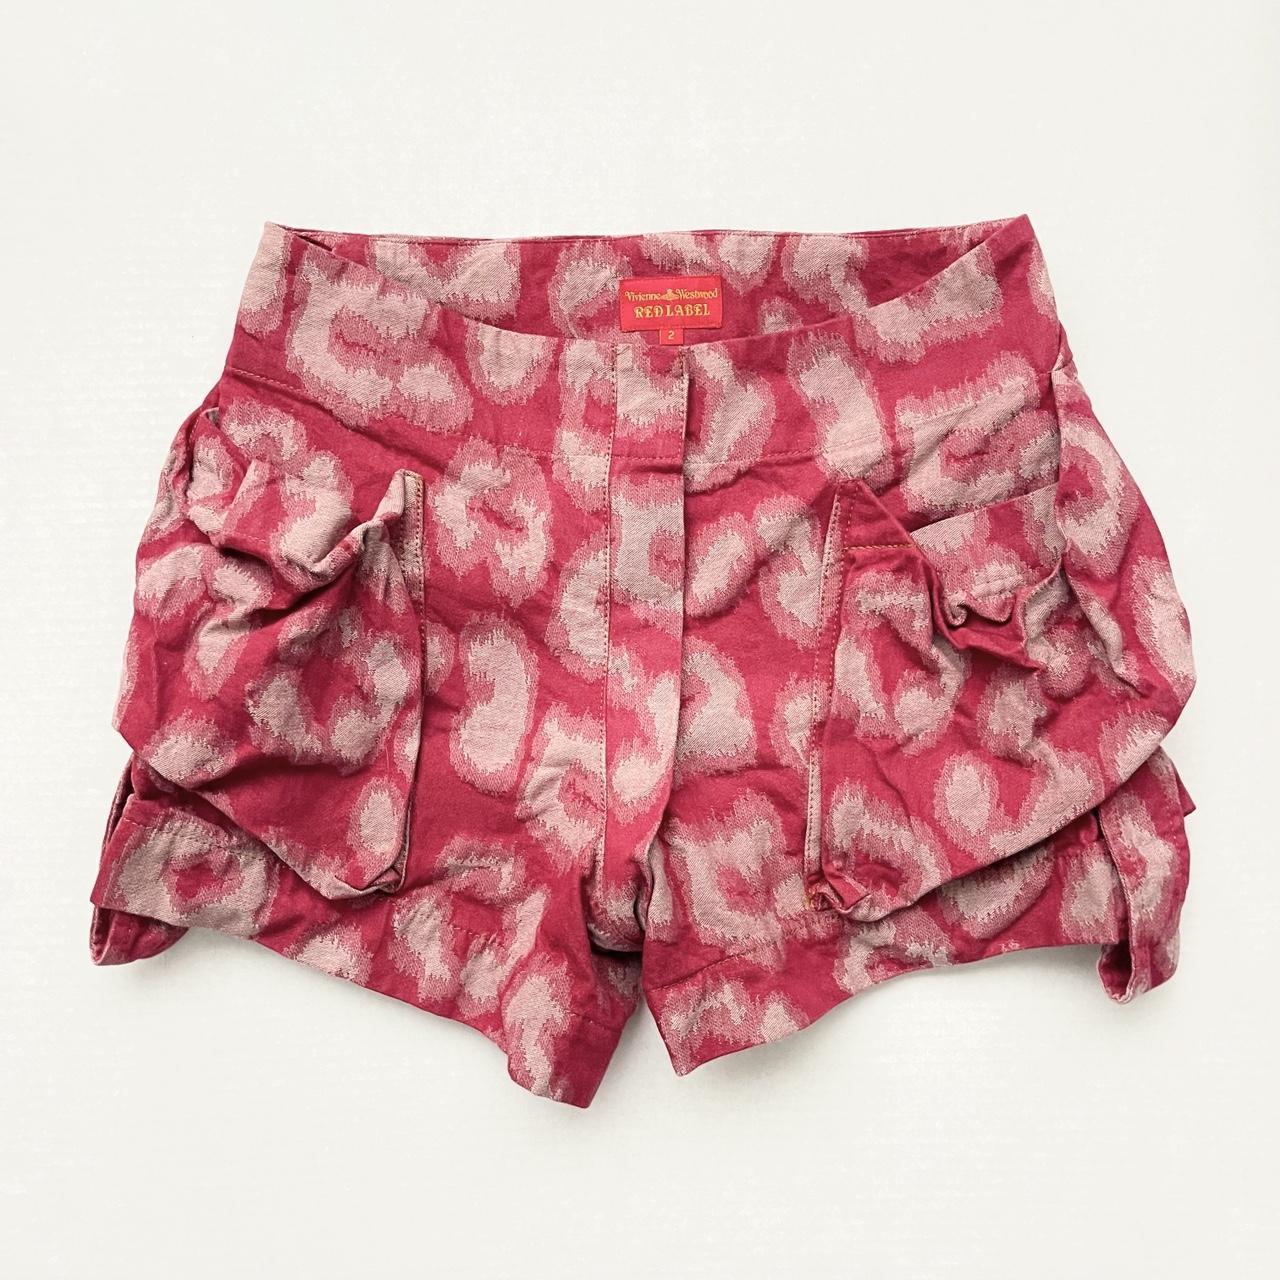 Vivienne Westwood Women's Pink and Red Shorts